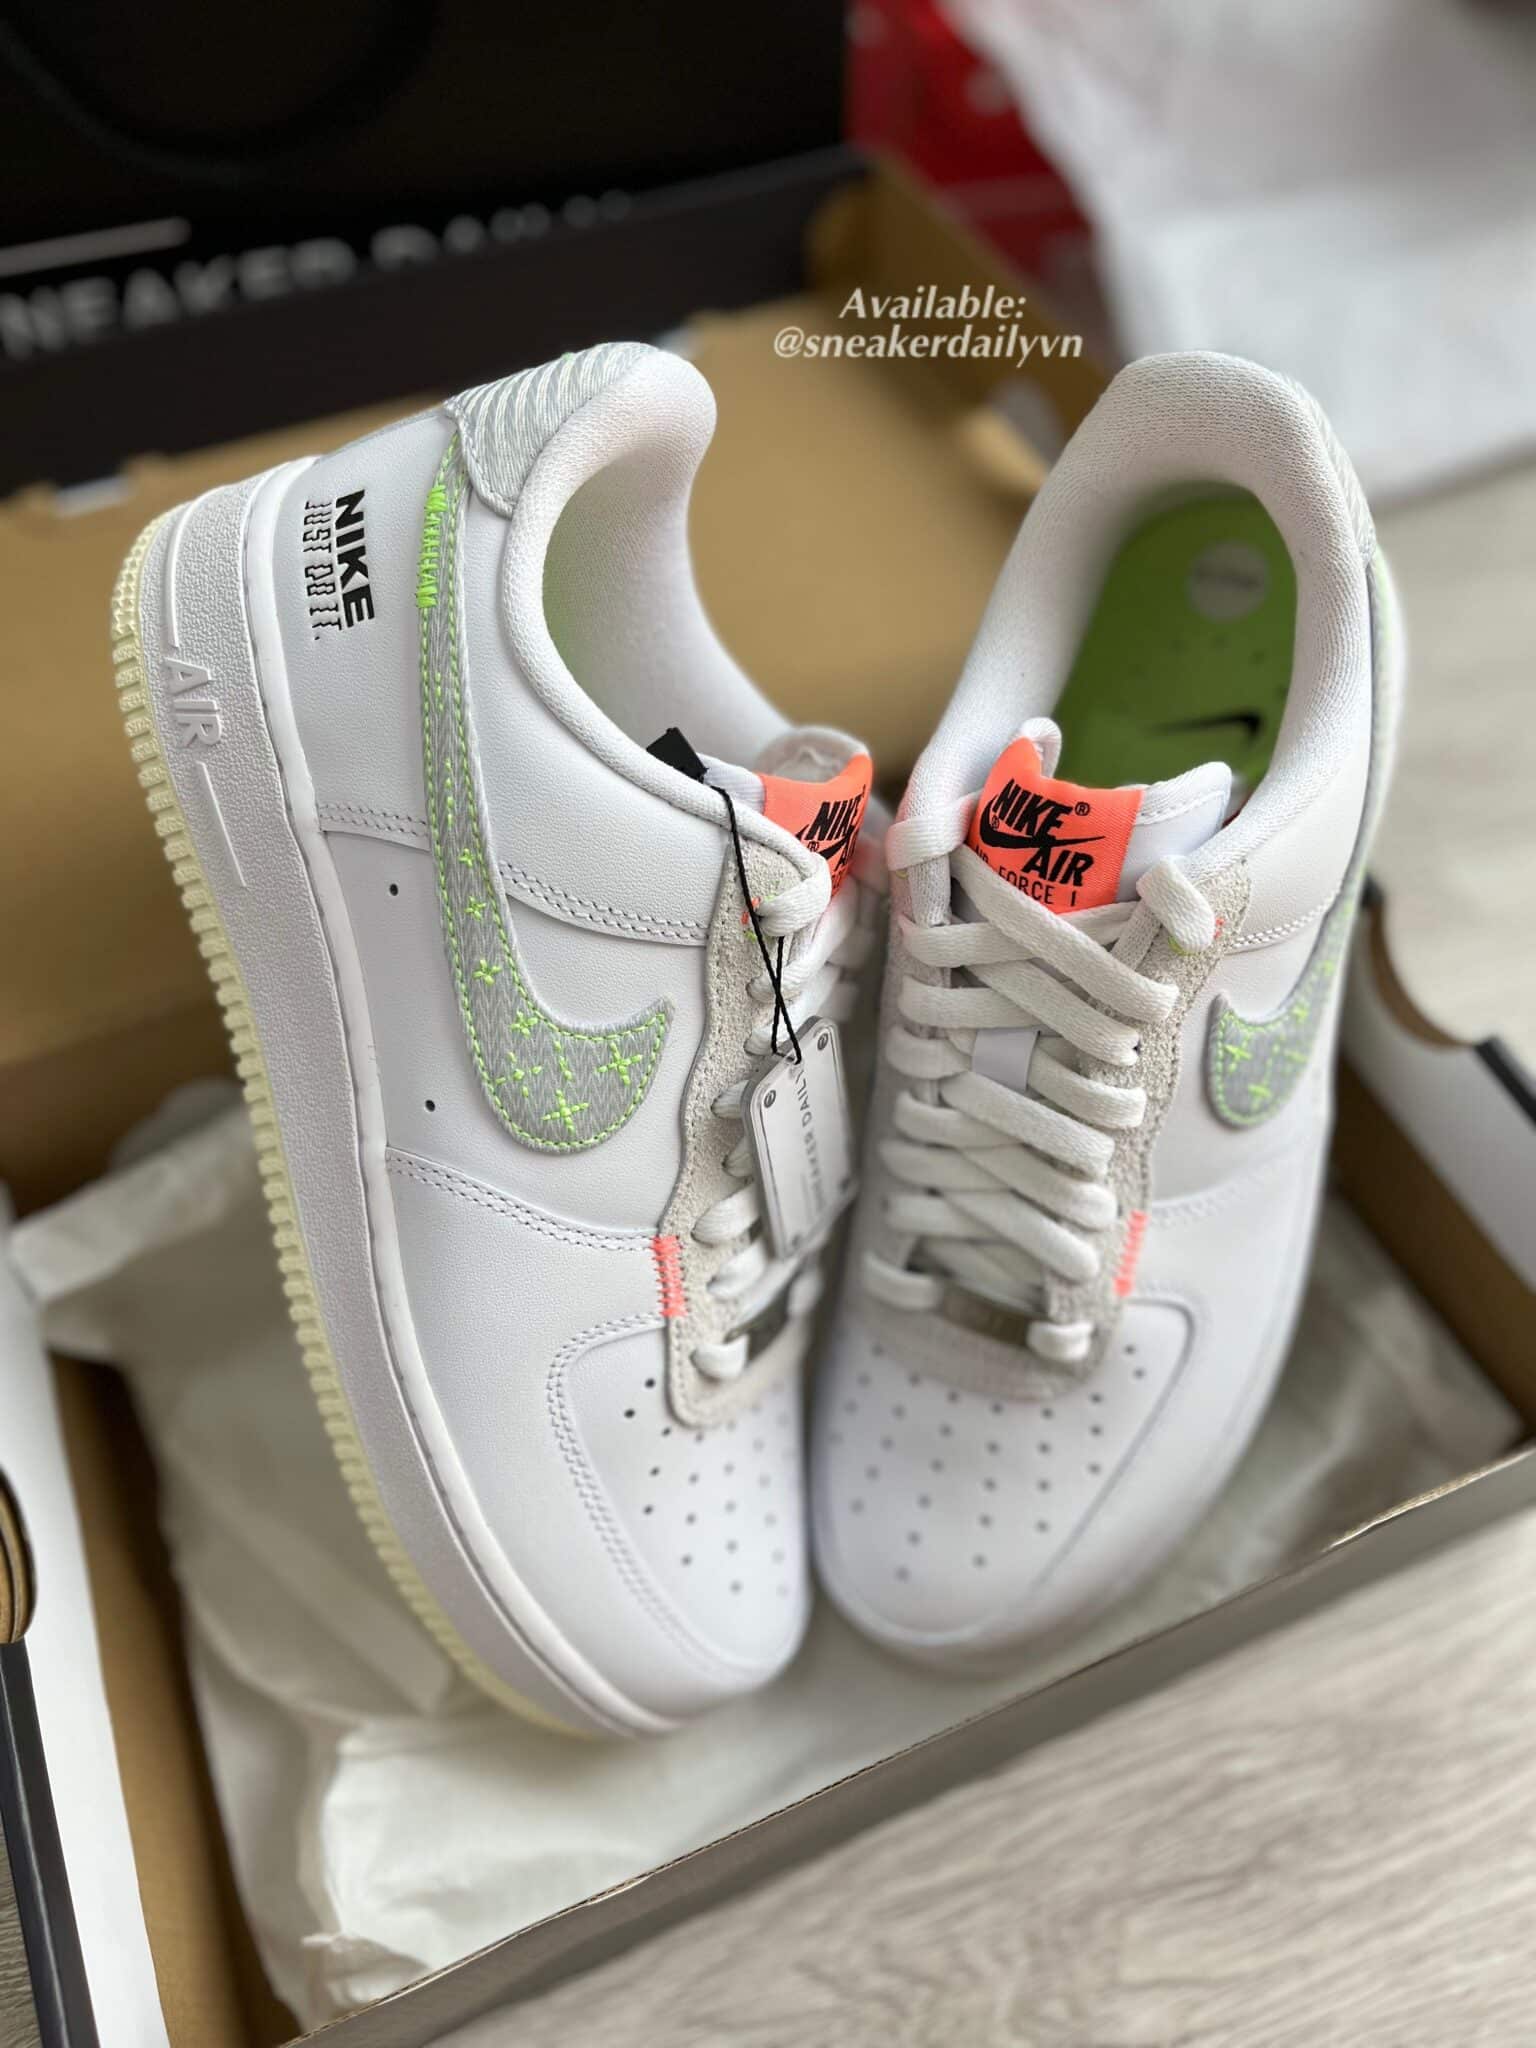 Nike Air Force 1 Low White/Neon Stitch FB1853-111